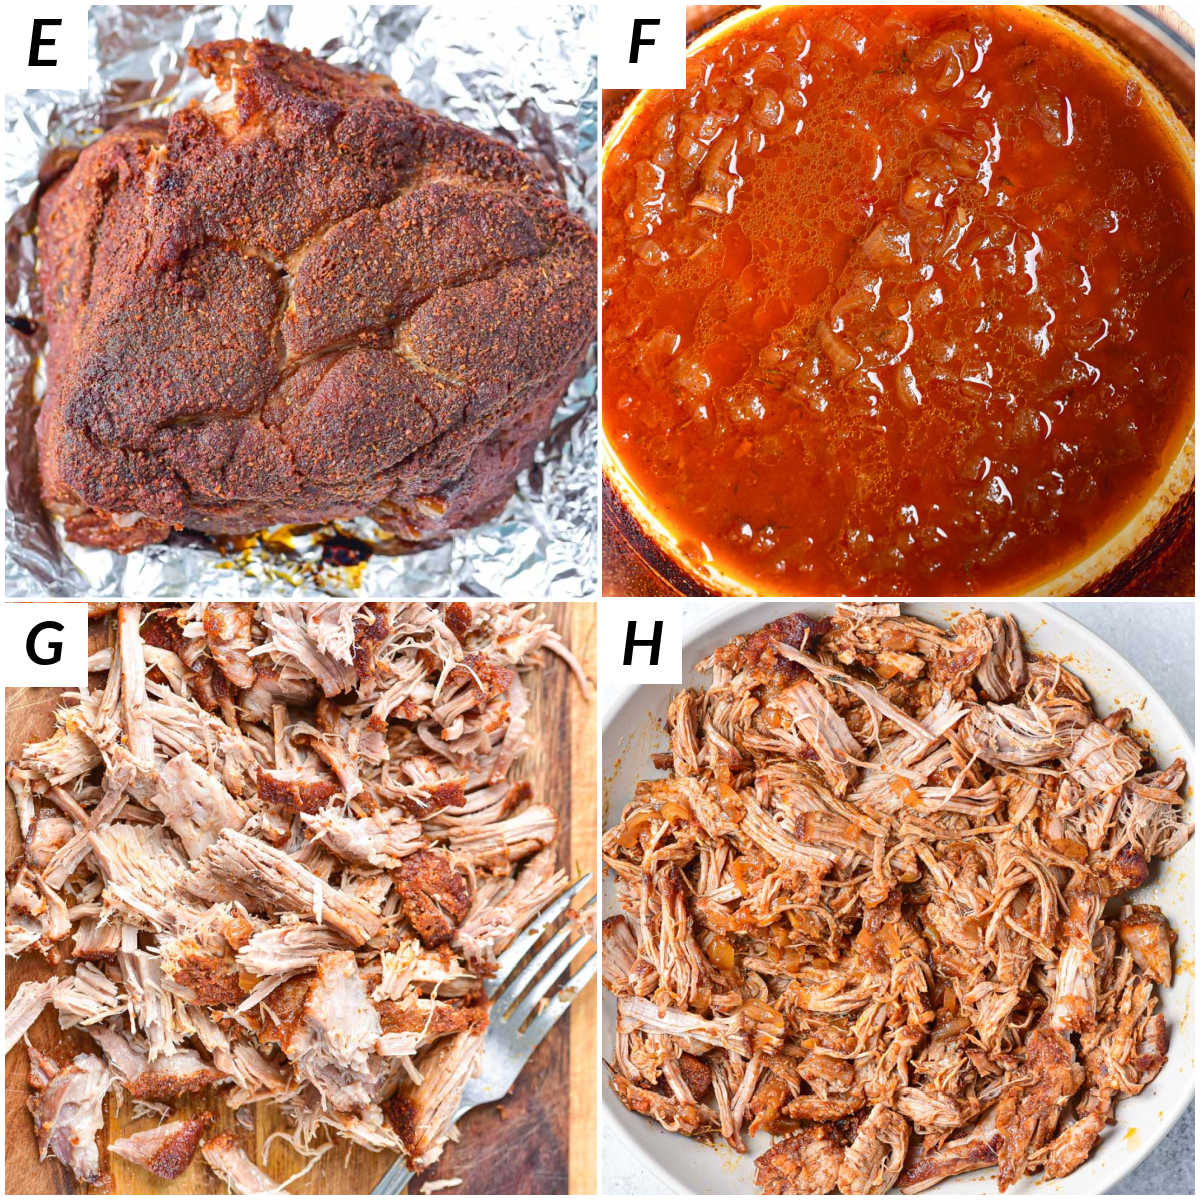 image collage showing the final steps for making dutch oven pulled pork